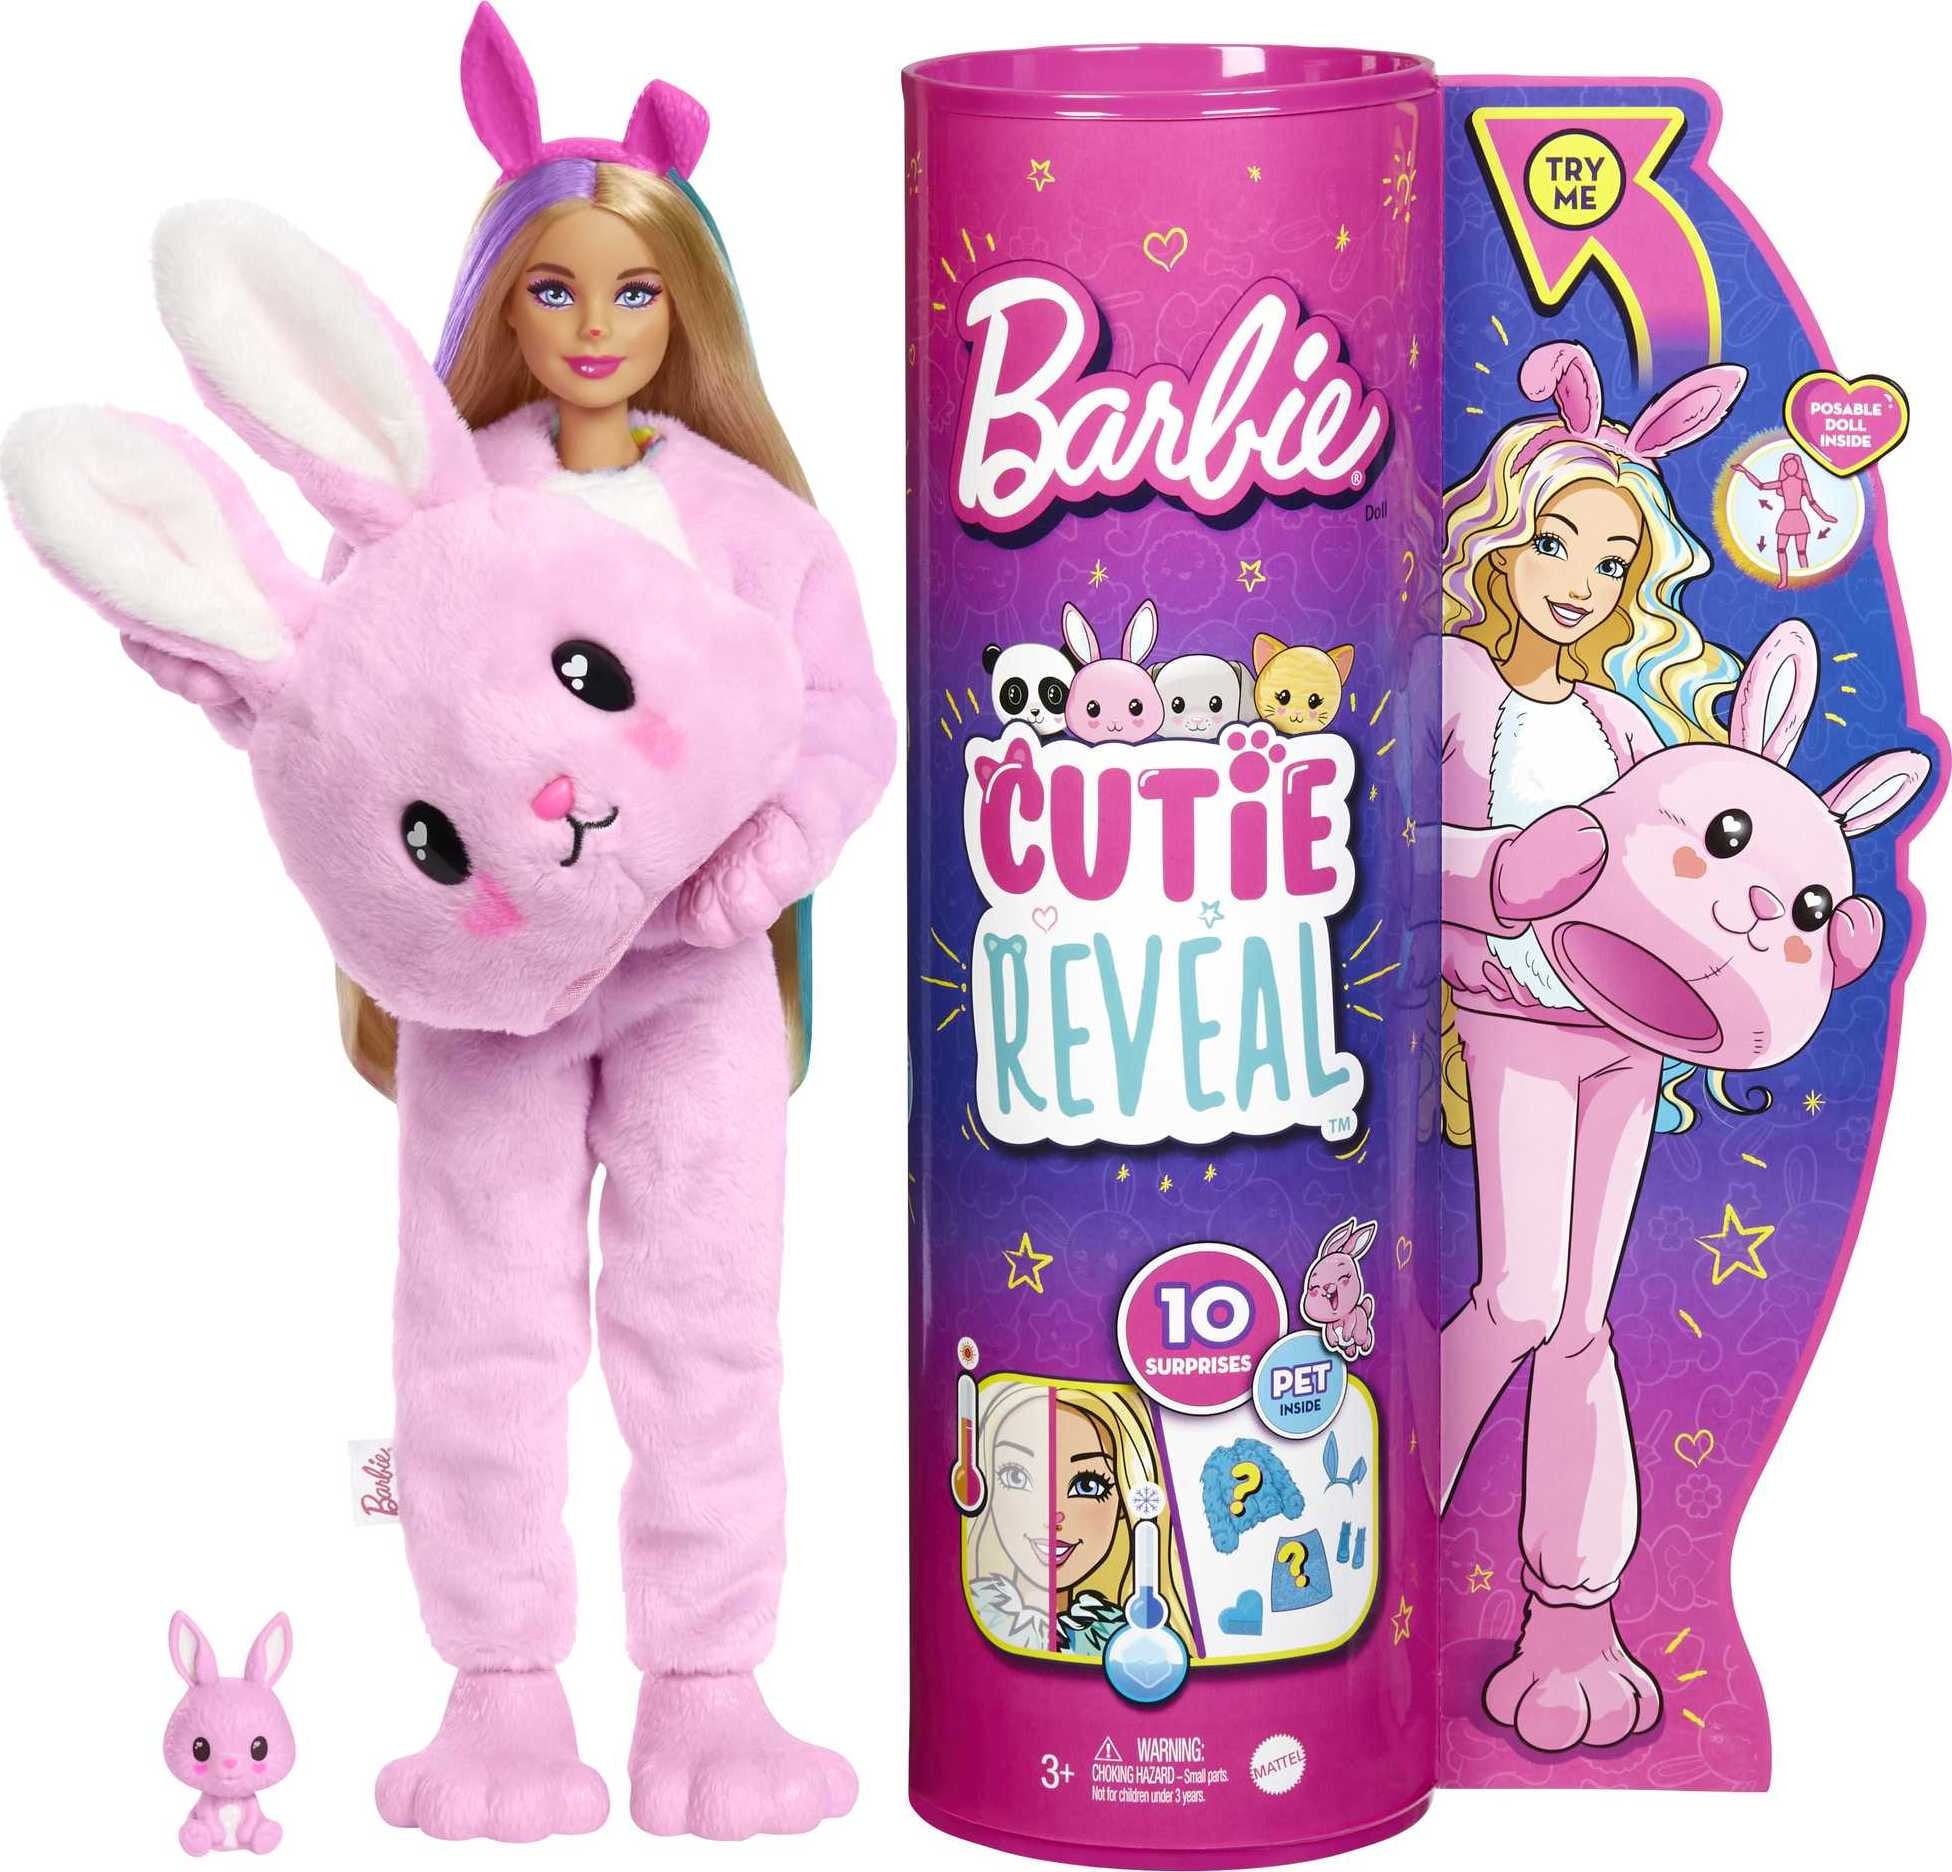 barbie-doll-cutie-reveal-bunny-plush-costume-doll-with-pet-color